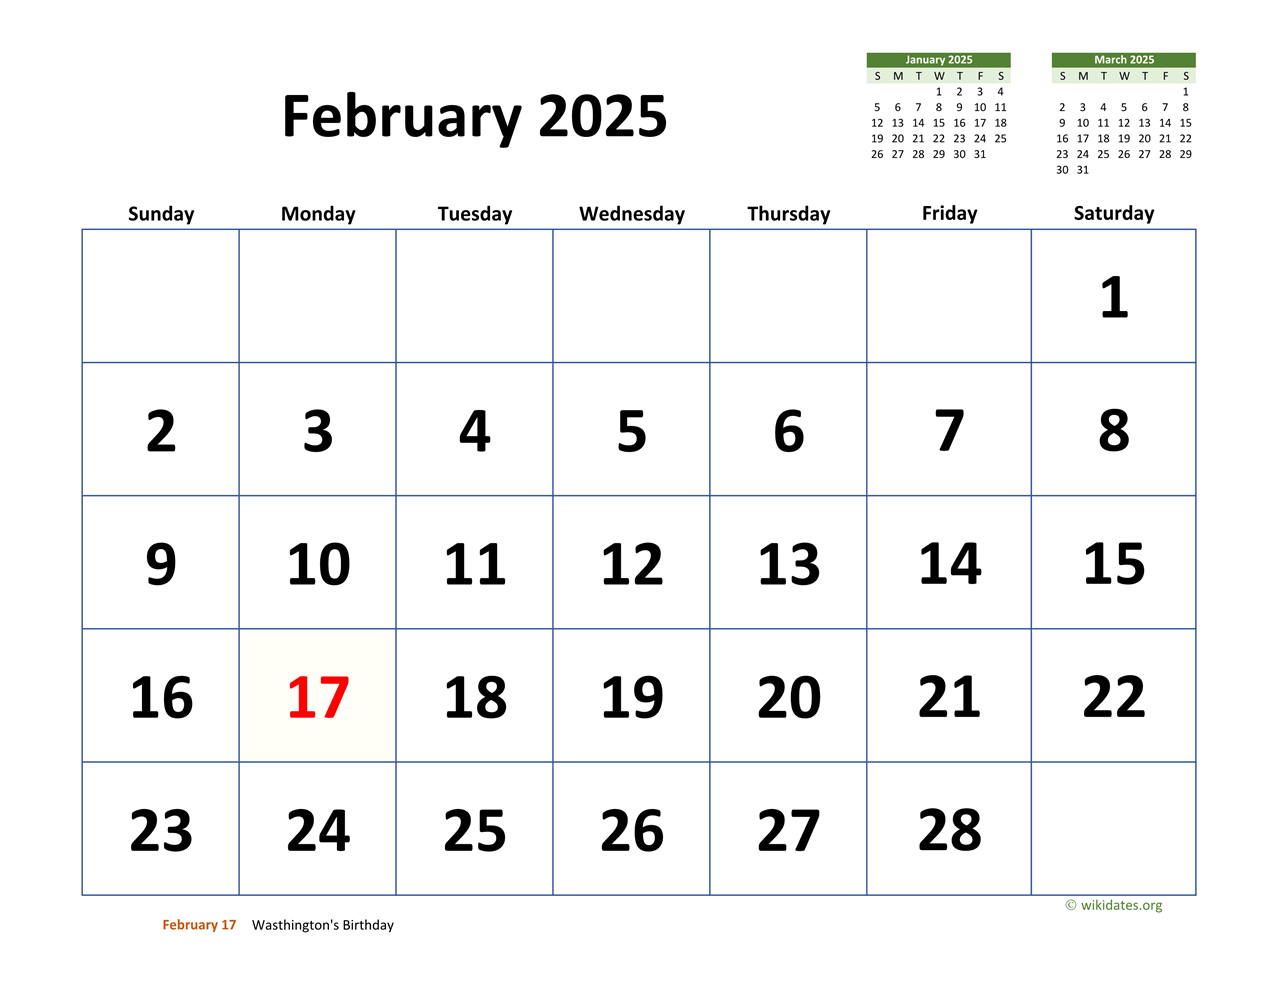 February 2025 Calendar with Extralarge Dates